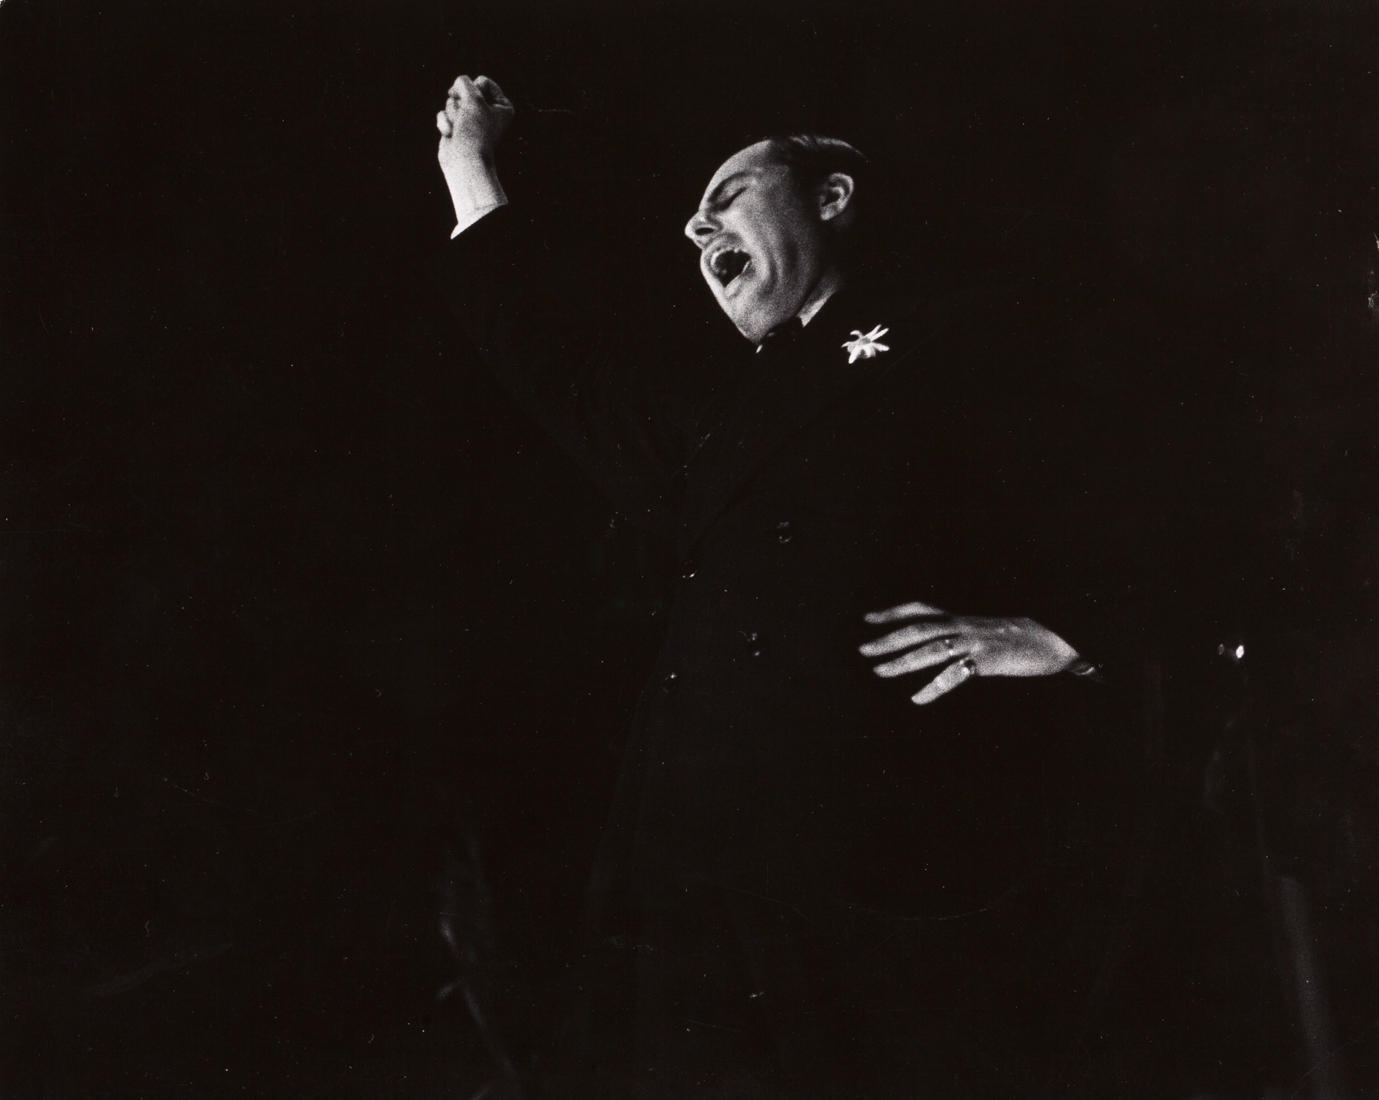 Léon Degrelle campaigning, Brussels by Robert Capa, 1937